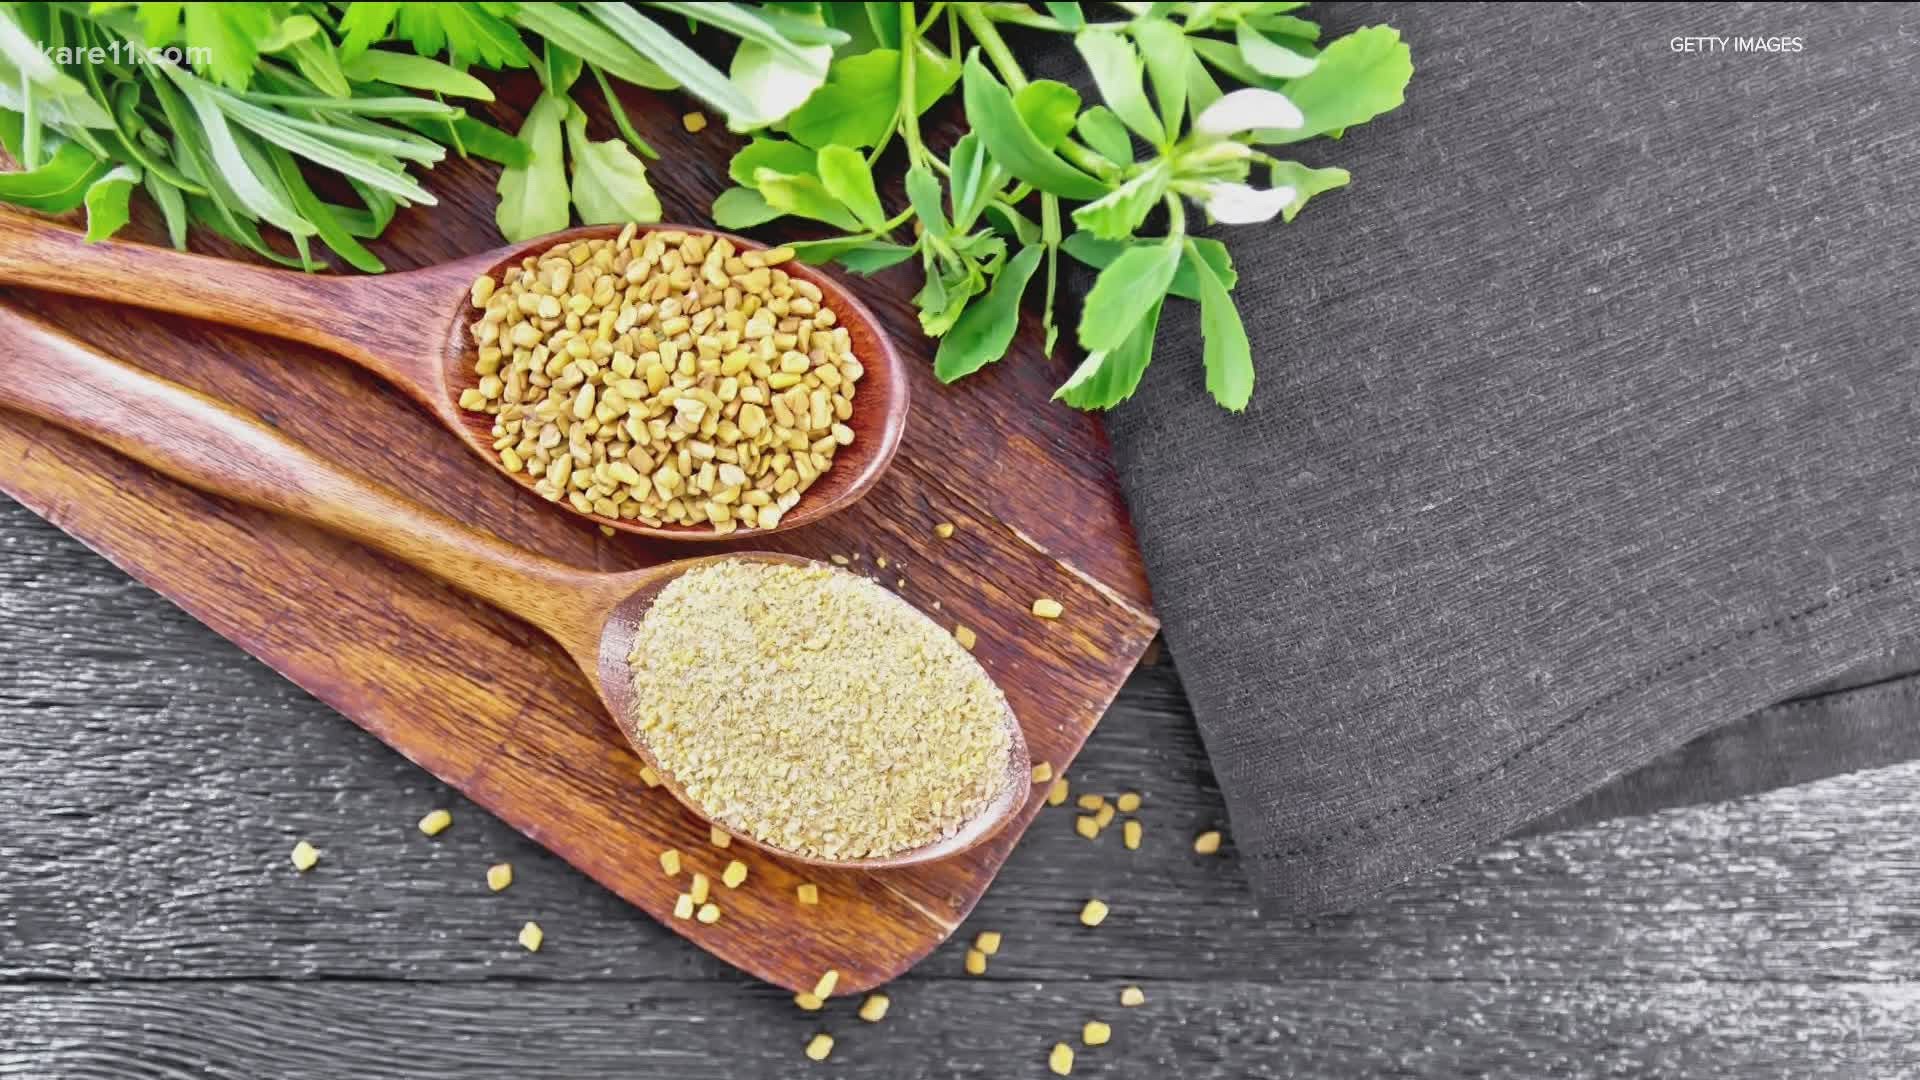 Spices are different than herbs, who knew?! I connected with Tasha Greer, author of Grow Your Own Spices, via Zoom to chat about the new book.